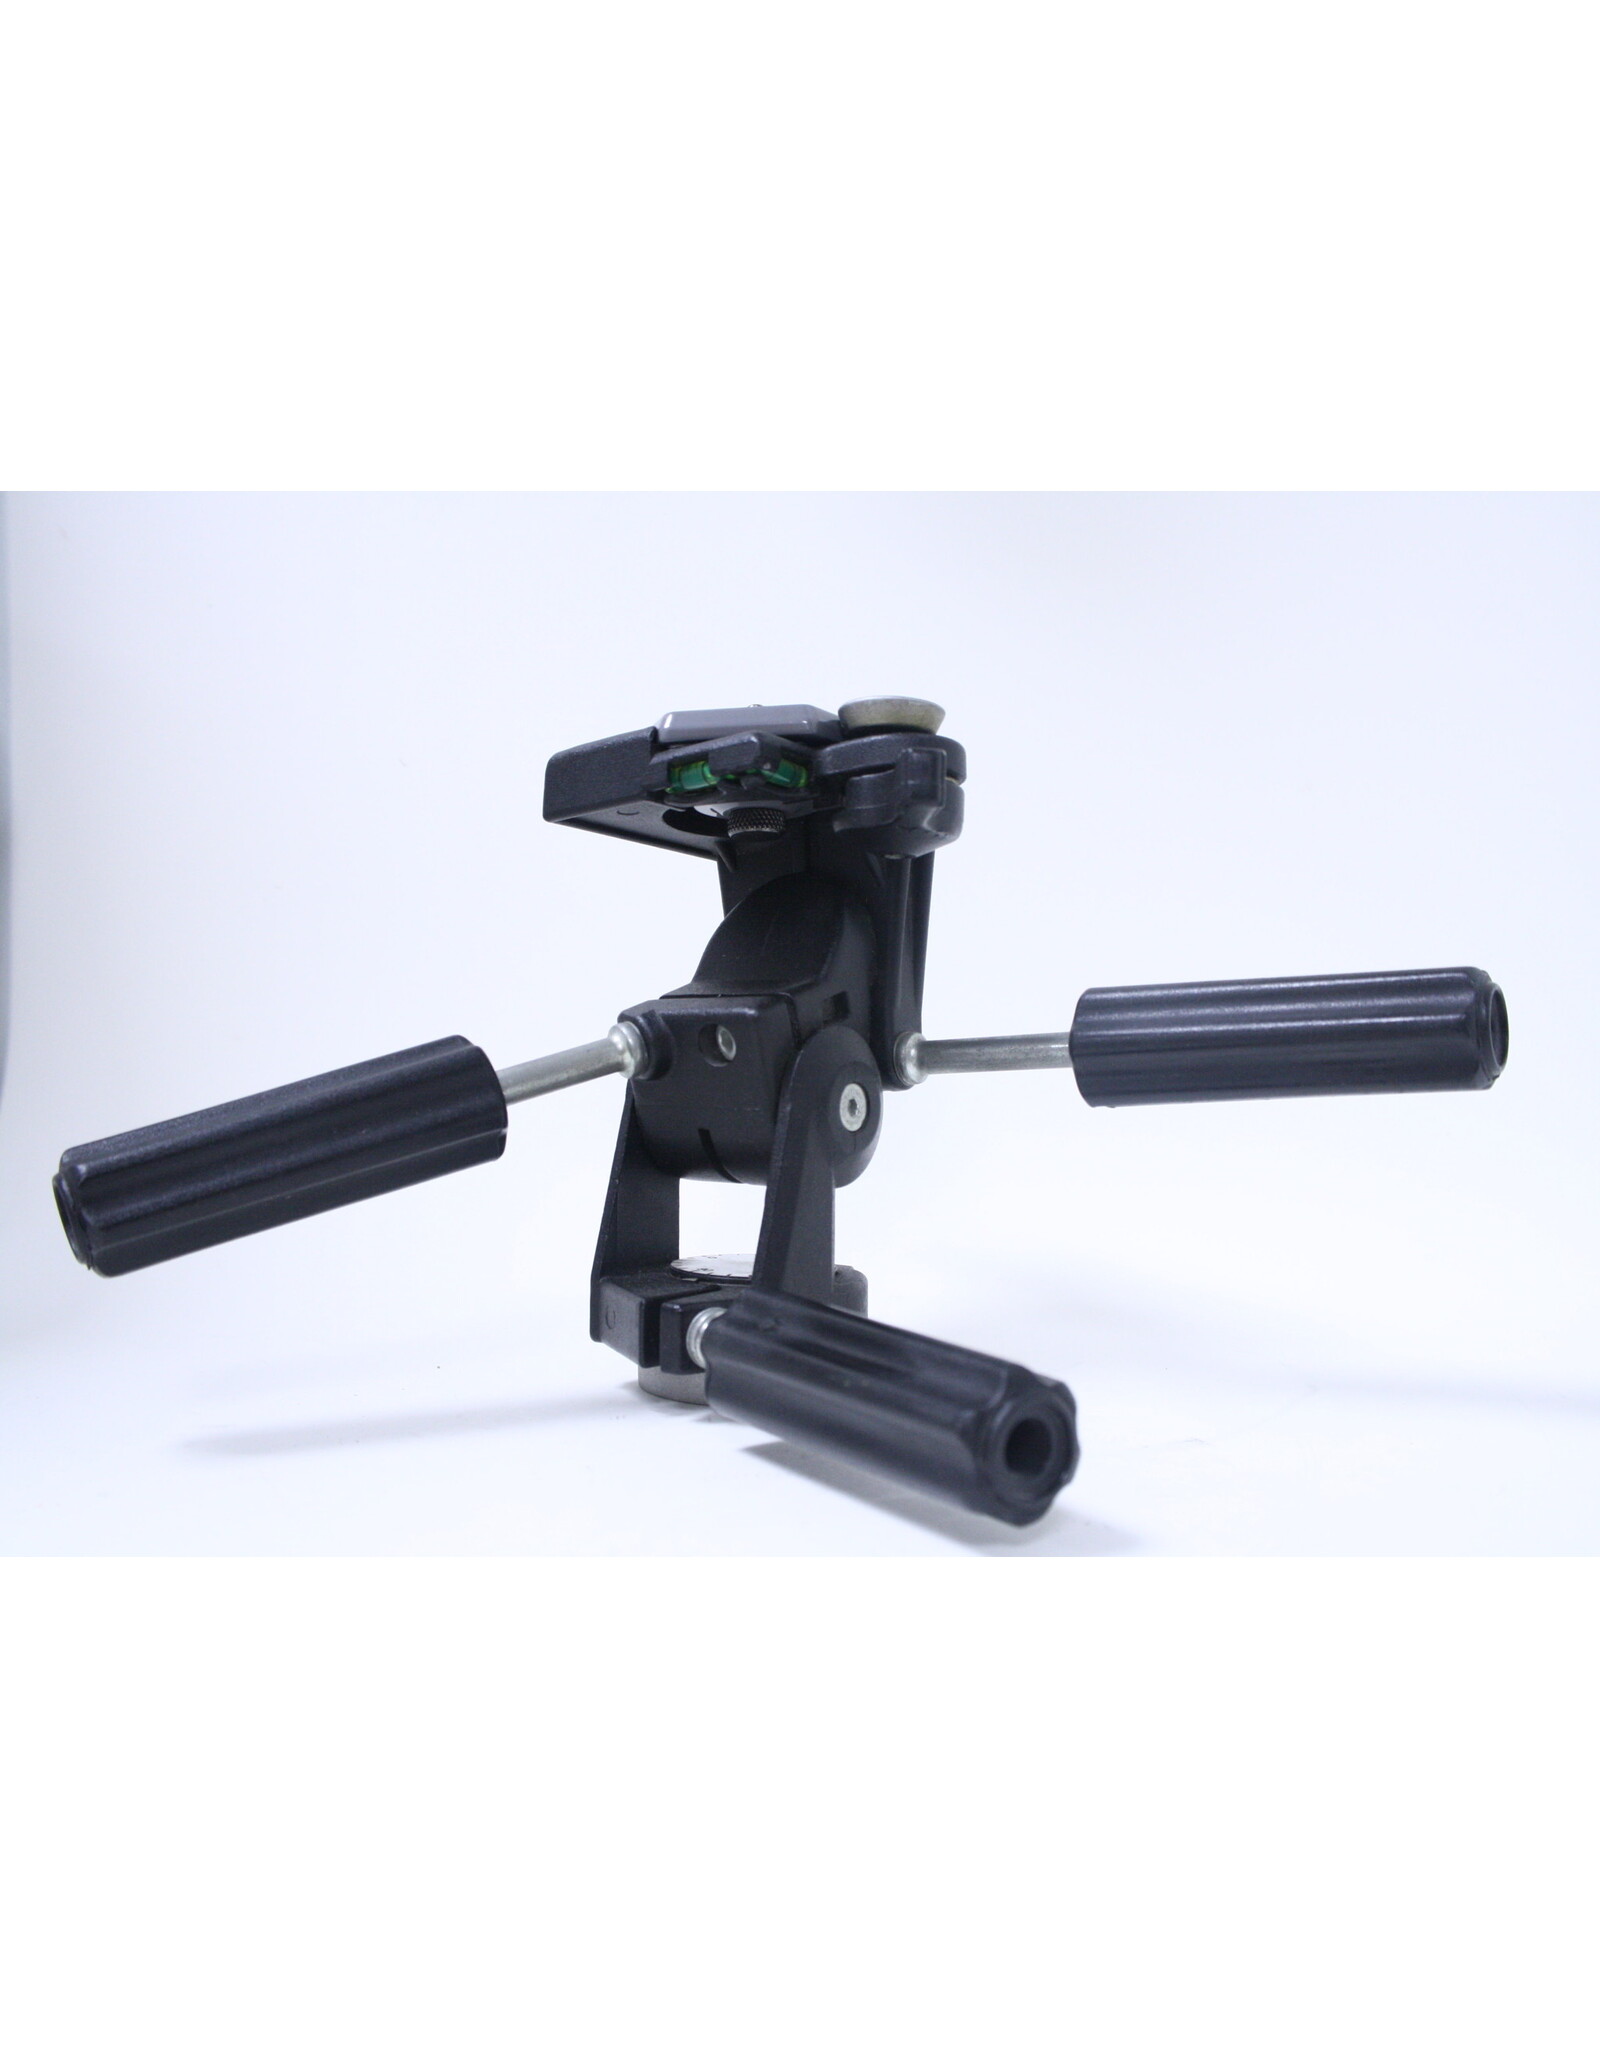 Bogen/Manfrotto Bogen Manfrotto #3050 Tripod with Bogen #3047 Head with Quick Release Plate (Pre-owned)